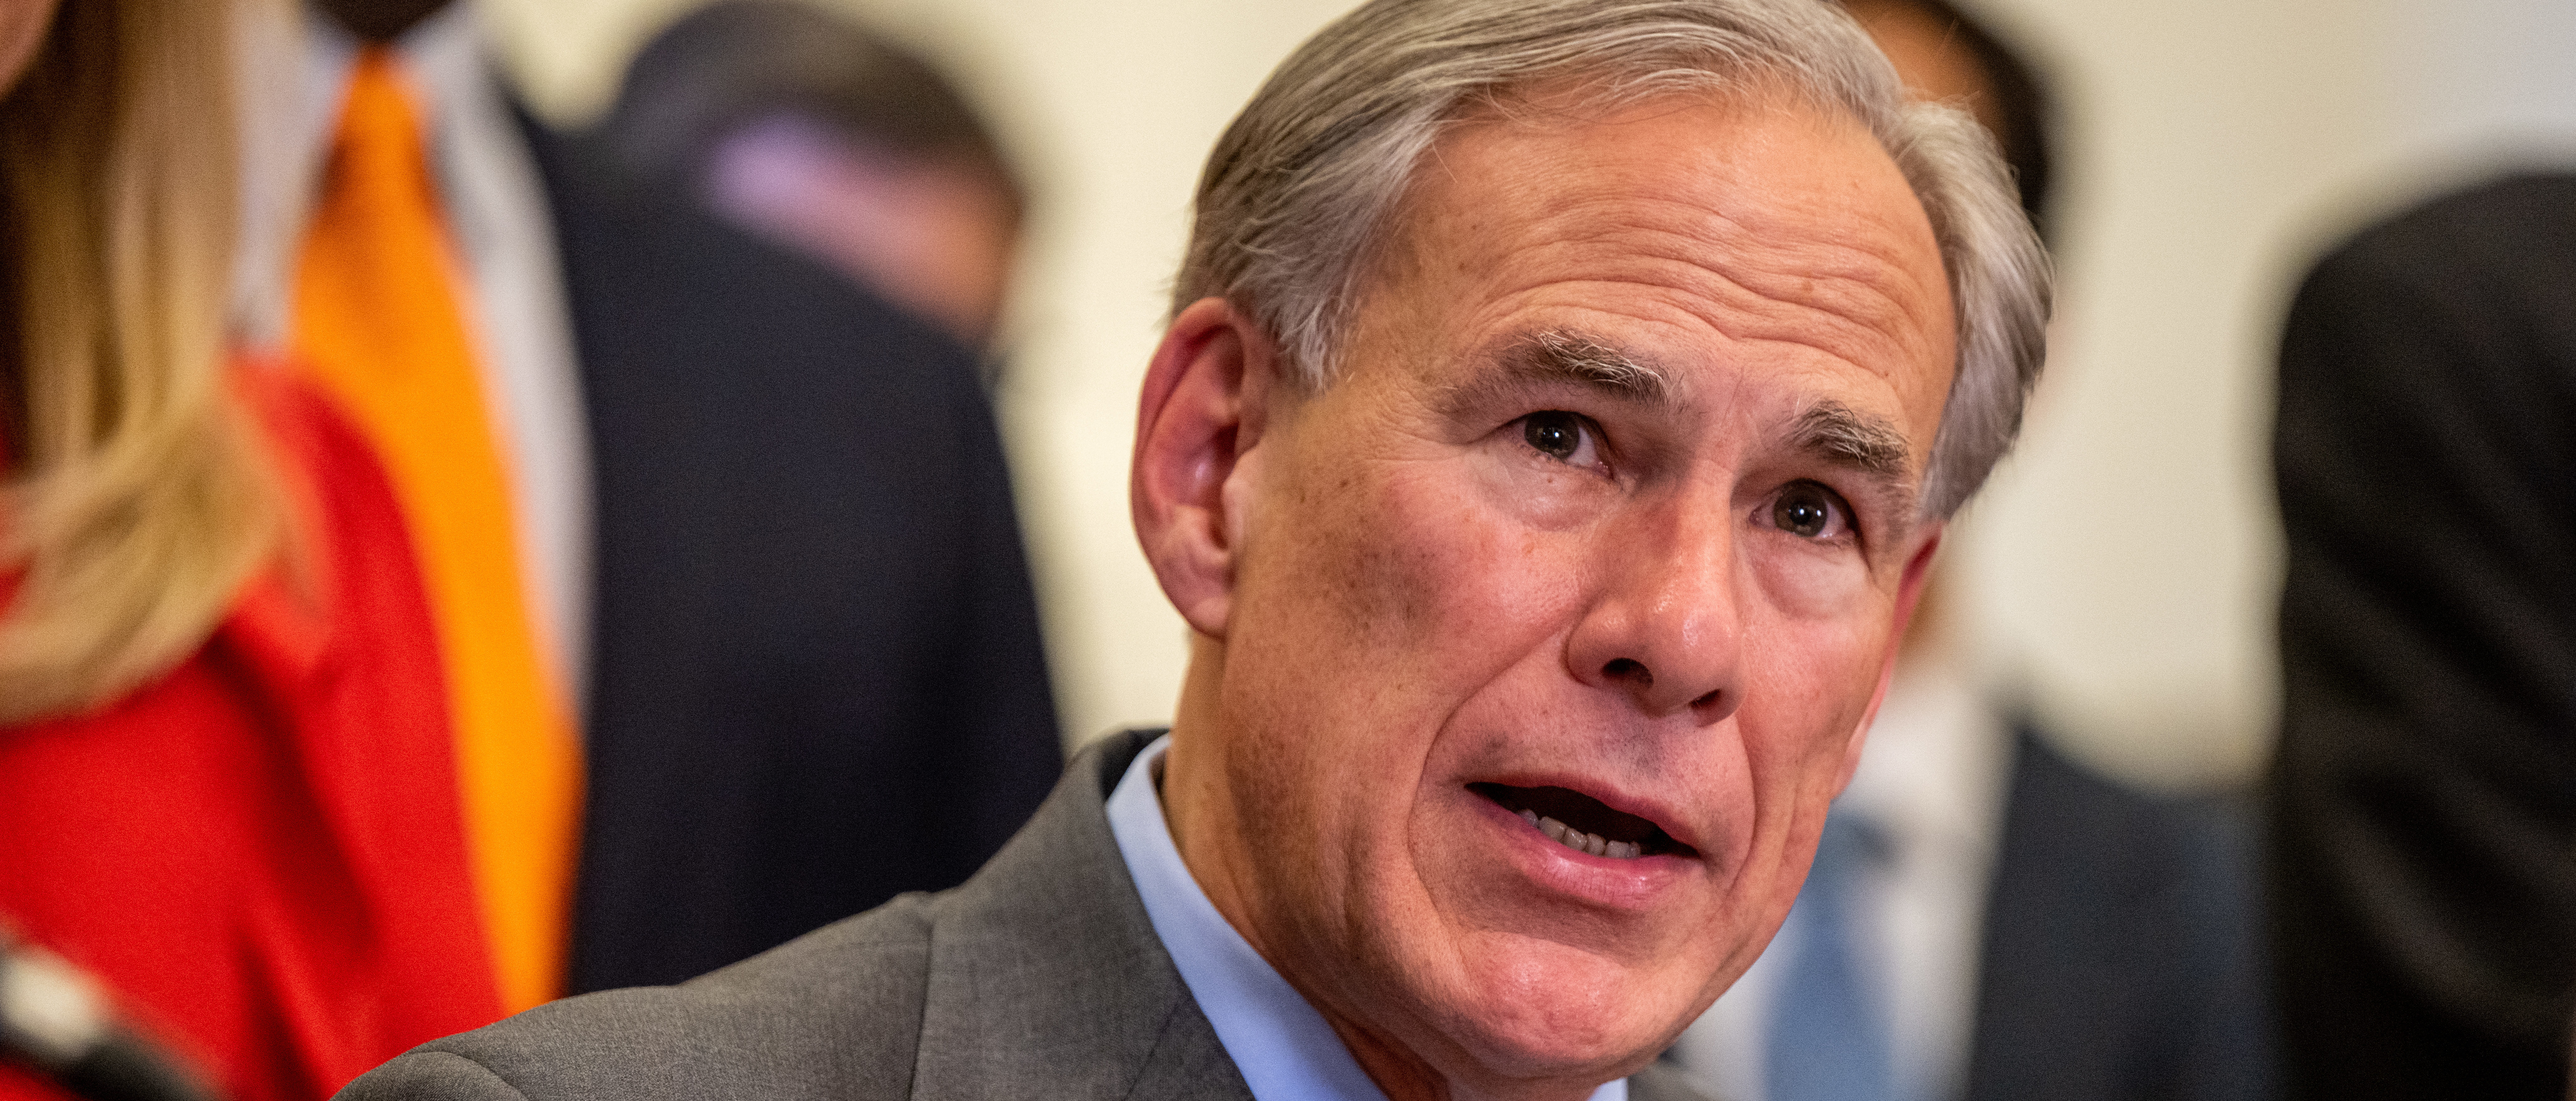 Texas Gov. Greg Abbott speaks during a news conference on March 15, 2023 in Austin, Texas. Gov. Abbott and state officials attended a news conference where they spoke on the proposed Texas Helpful Incentives to Produce Semiconductors (CHIPS) Act legislation. (Photo by Brandon Bell/Getty Images)